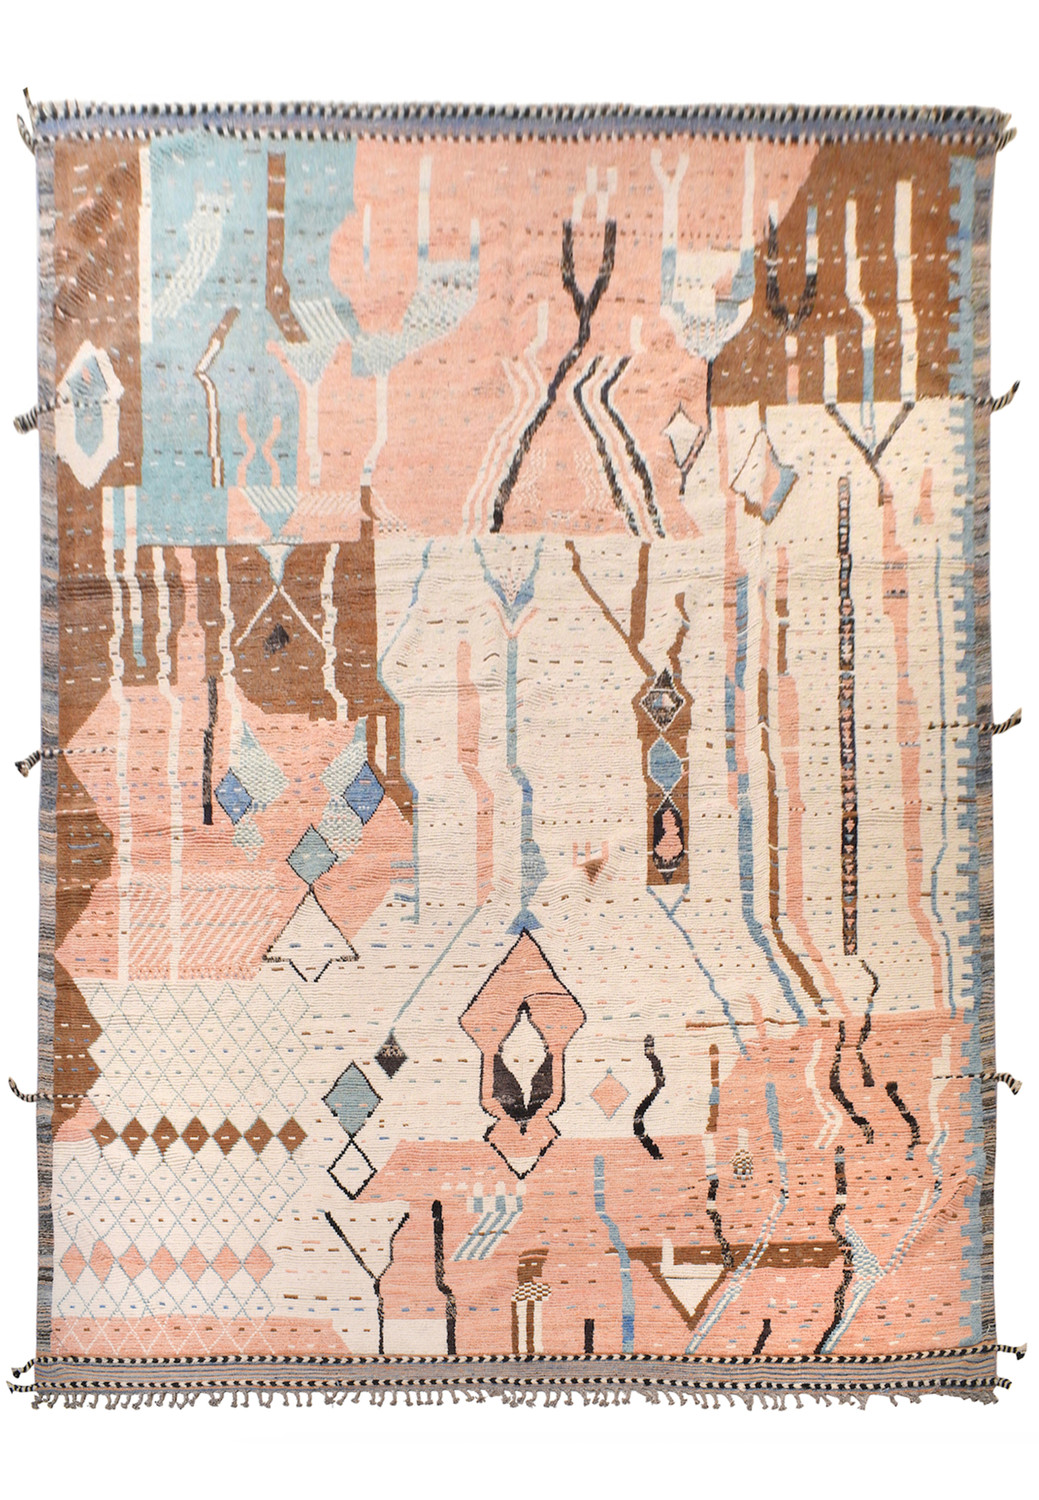 An overhead view of a modern Moroccan oversize rug with pastel peach, sky blue, and charcoal patterns on an ivory background